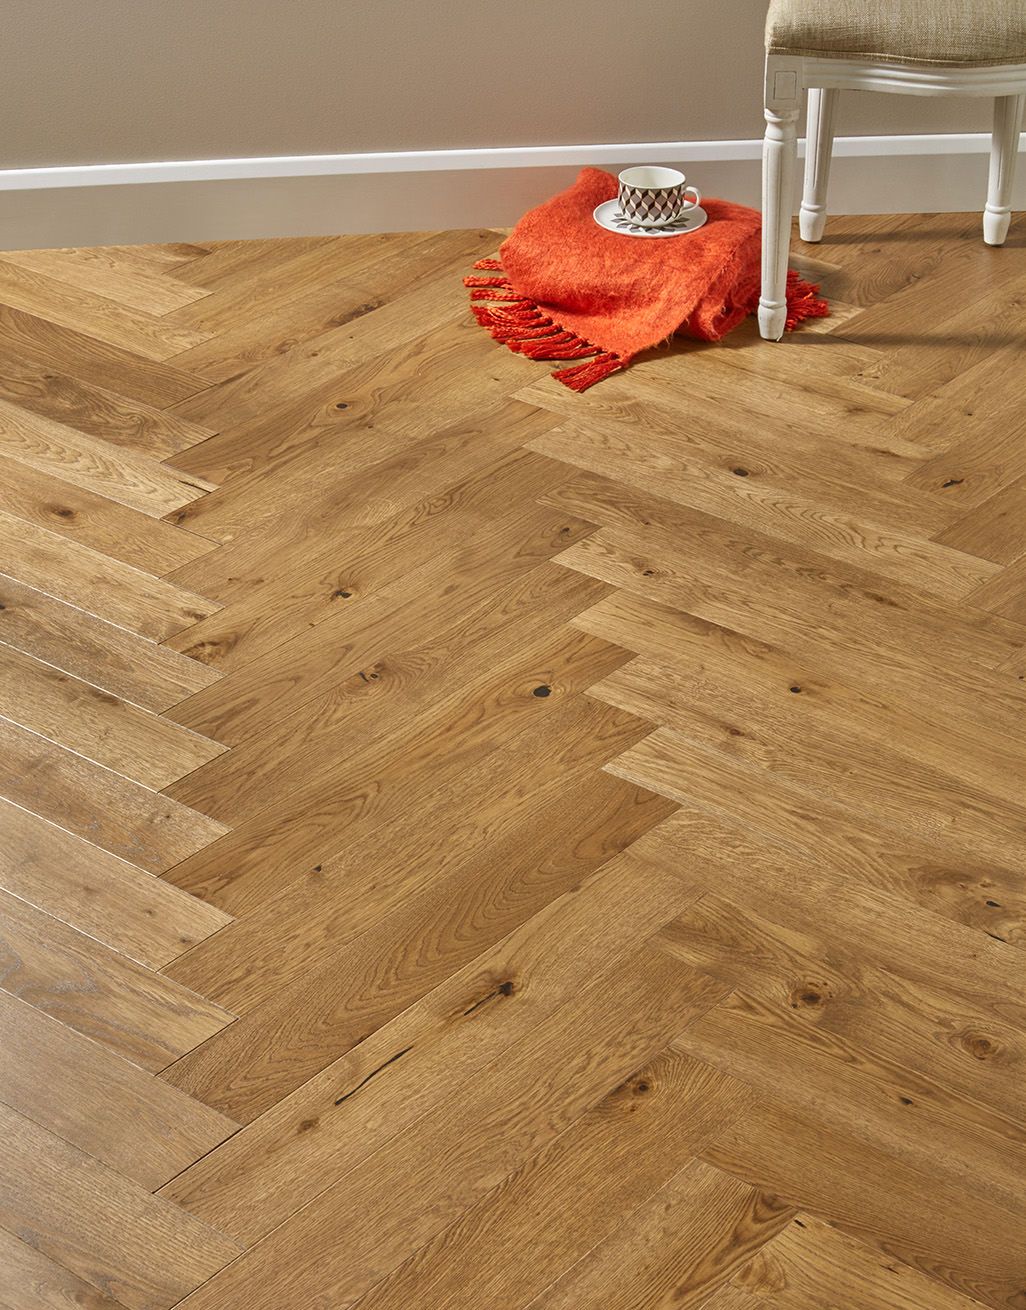 Most Popular Types of Home Flooring